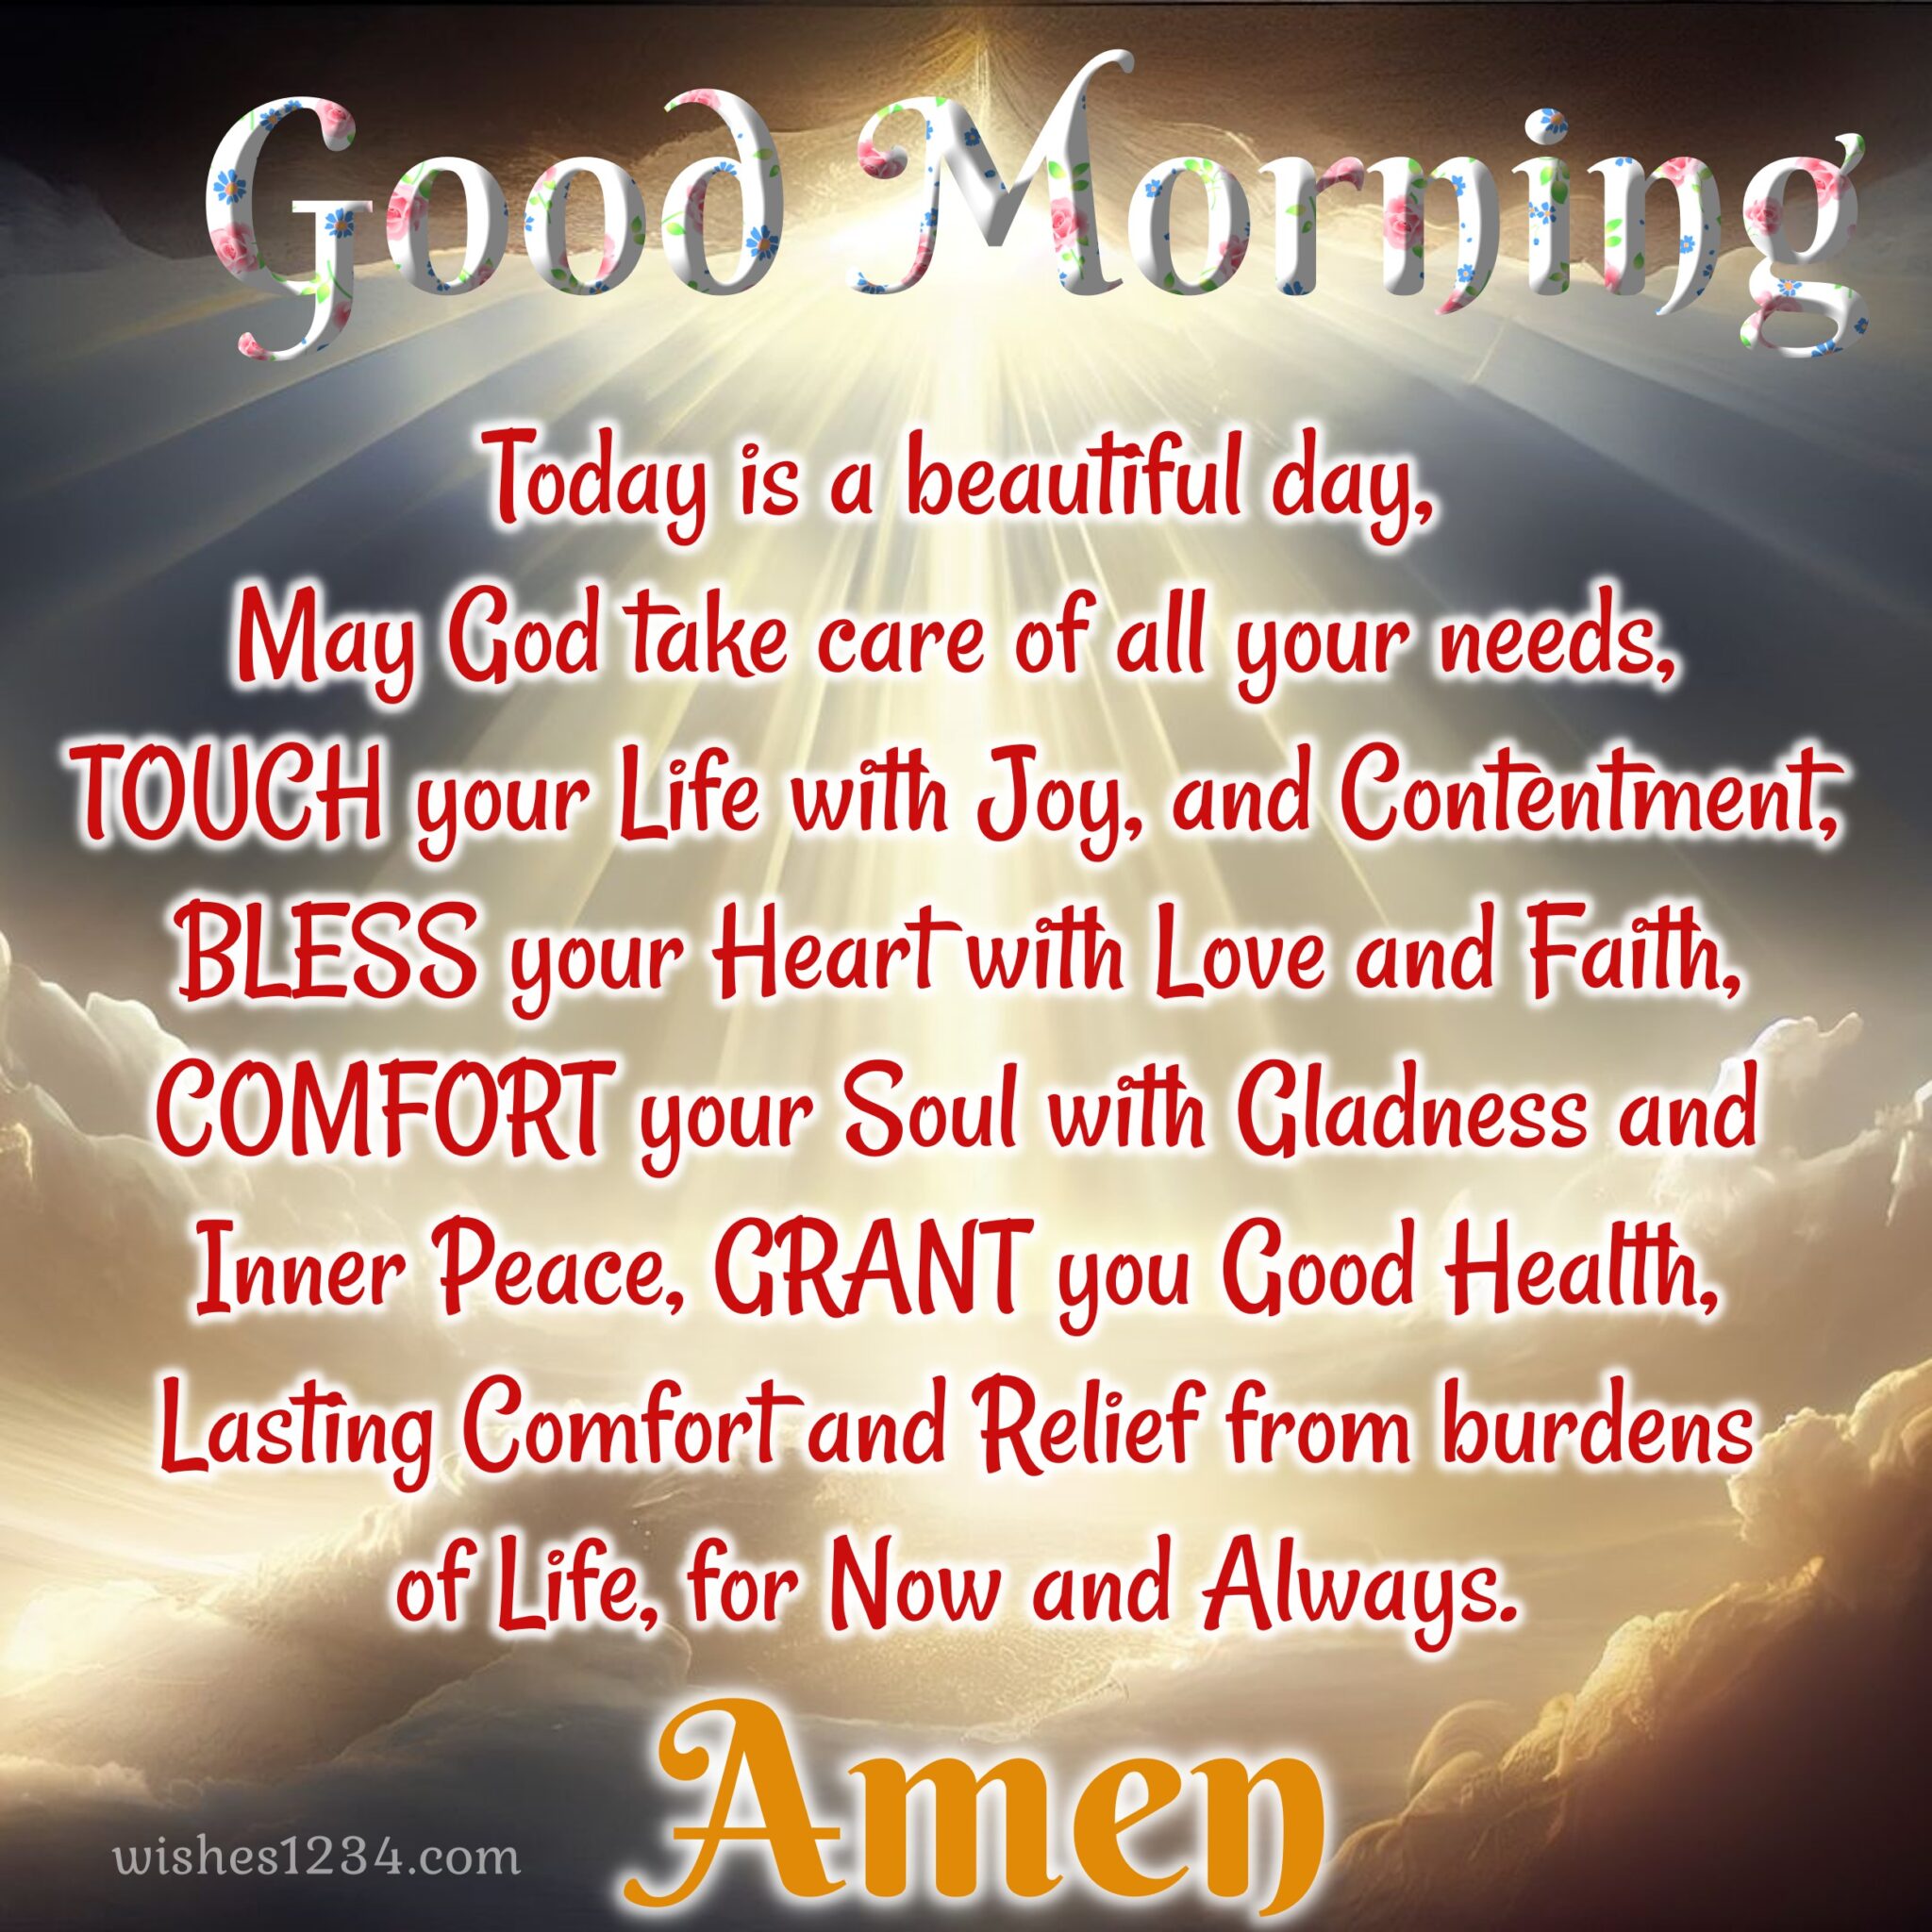 Good Morning Blessings and Prayers